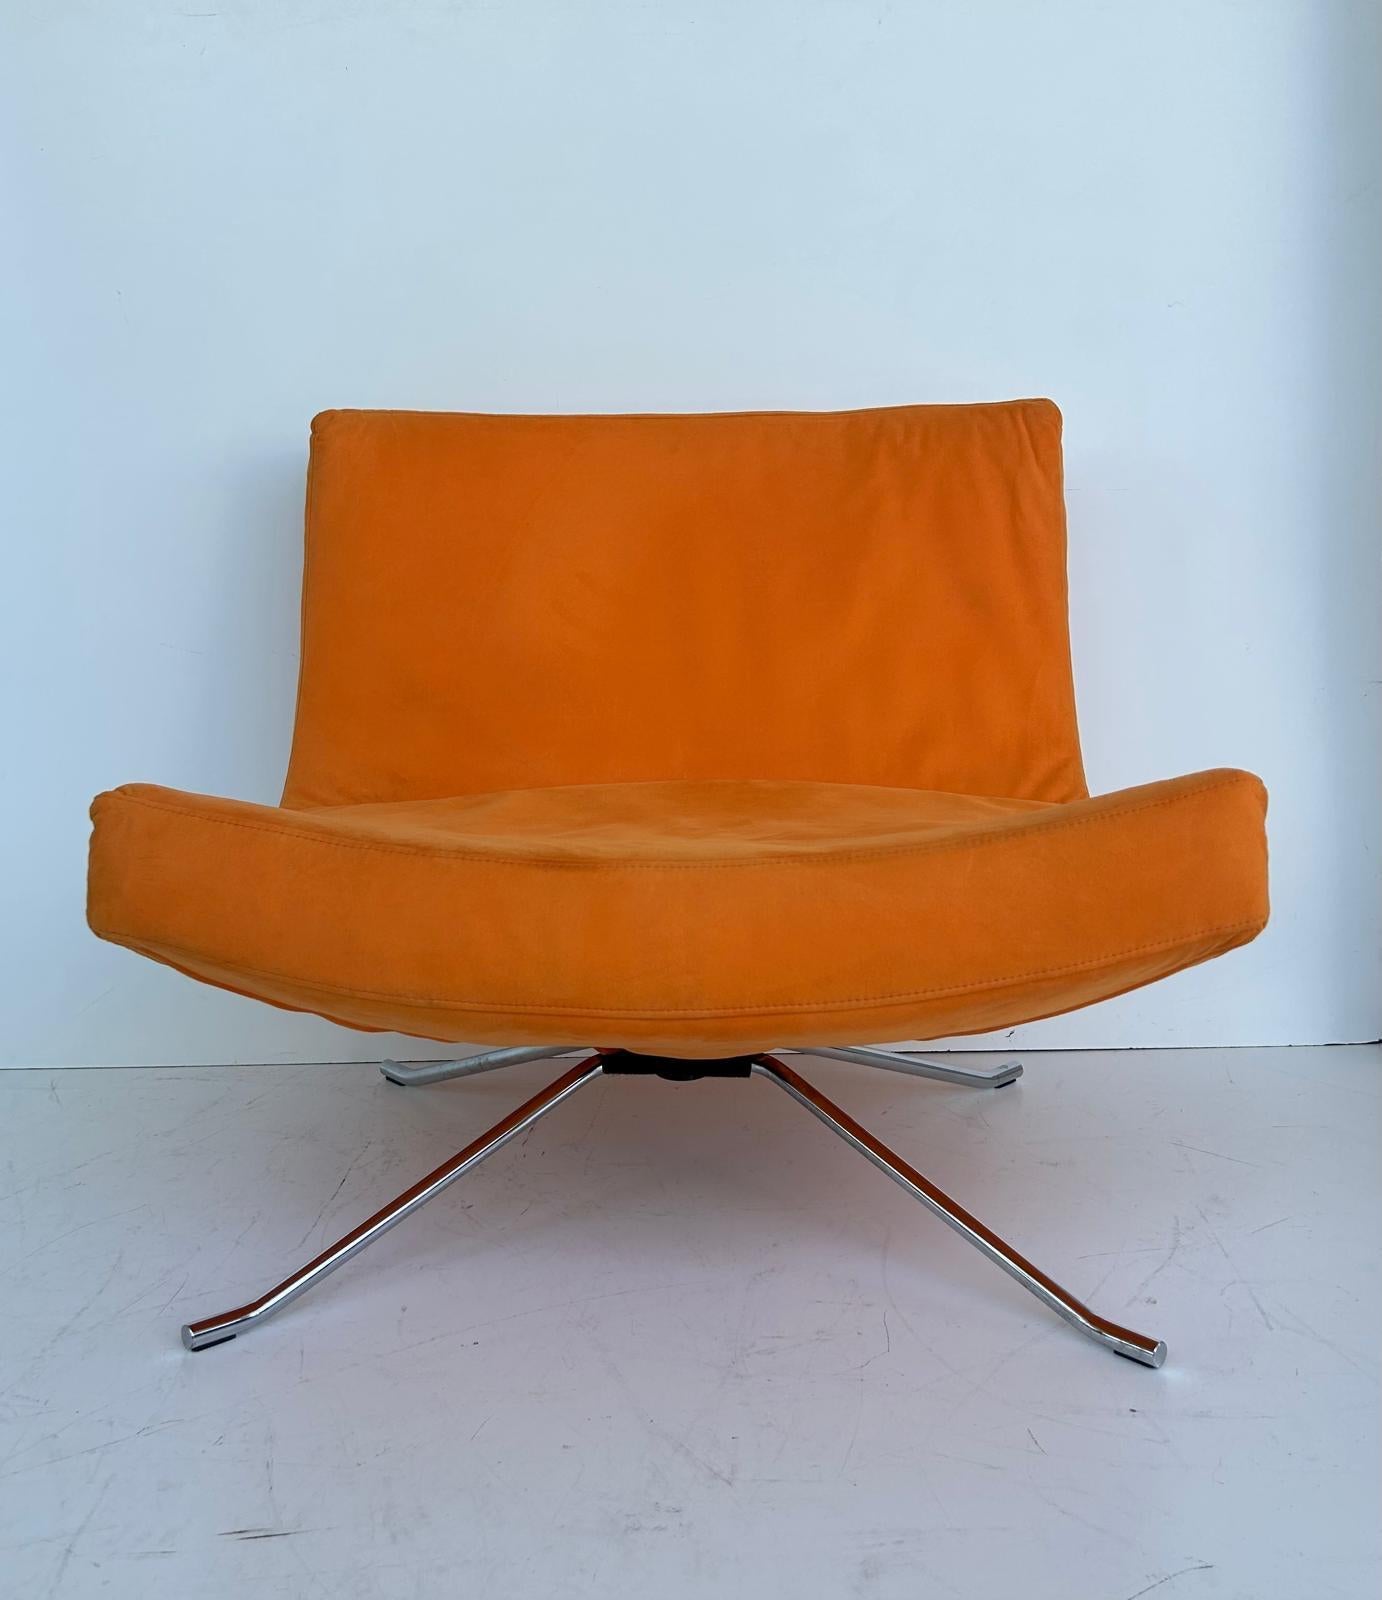 Christian Werner Ligne Roset 'Pop' Lounge  Slipper Chair with Orange Ultrasuede 

Offered for sale is an upholstered contemporary  'Pop' Lounge Chair by Christian Werner for Ligne Roset.  The chair has the original Ultrasuede upholstery and is